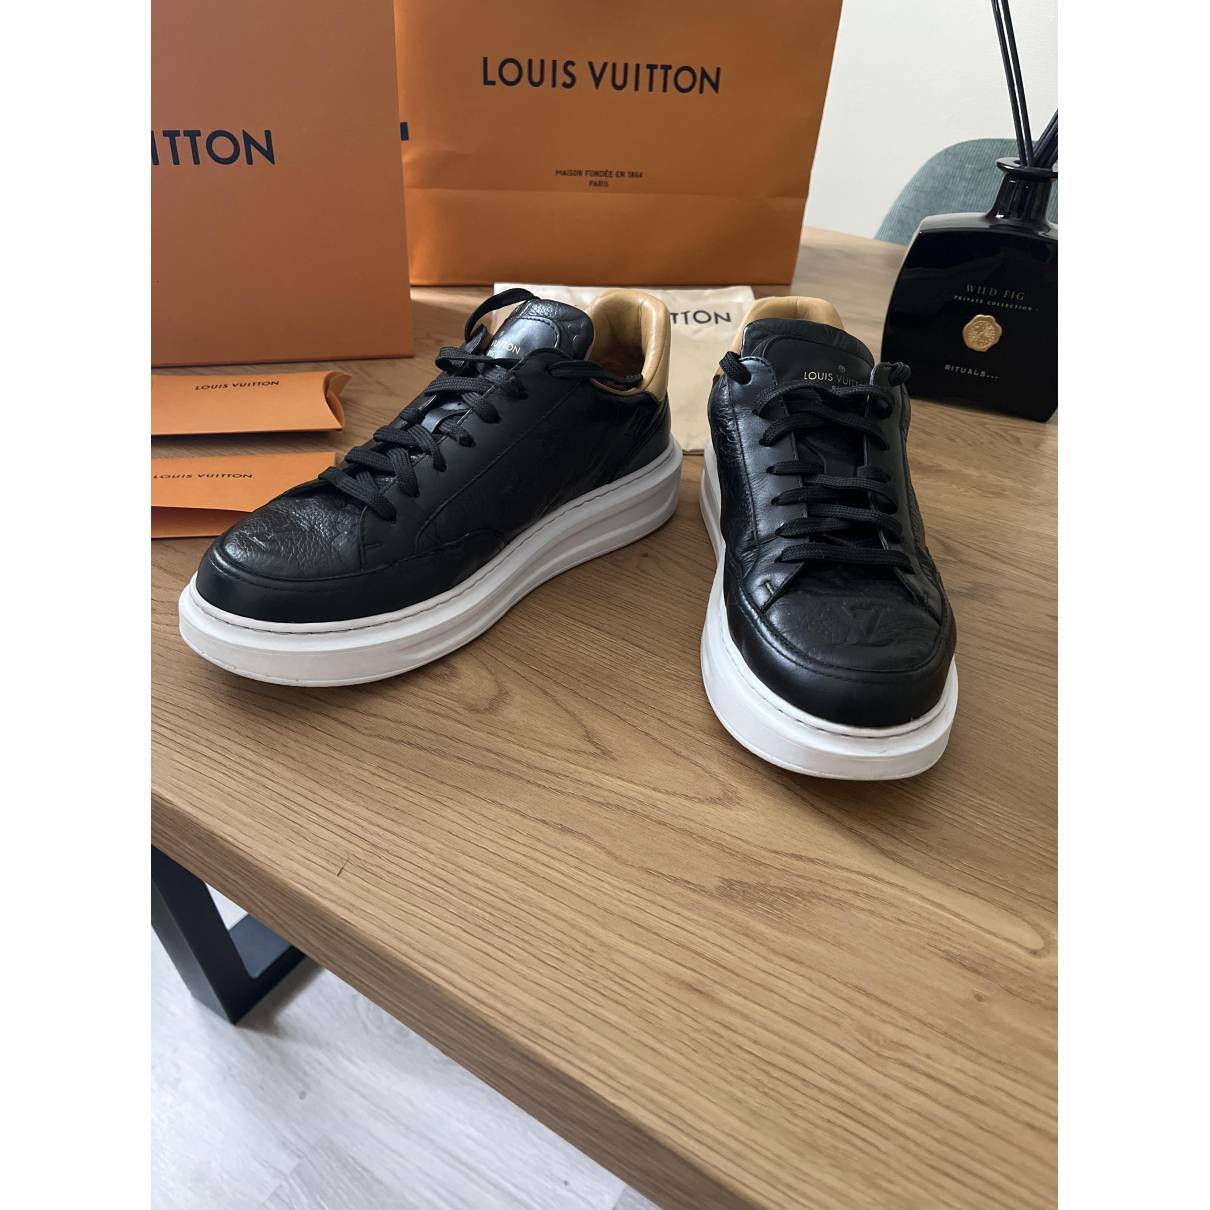 LOUIS VUITTON BEVERLY HILLS BLUE LEATHER LOW TOP SNEAKER L.V Sz 11 NEW  AUTHENTIC